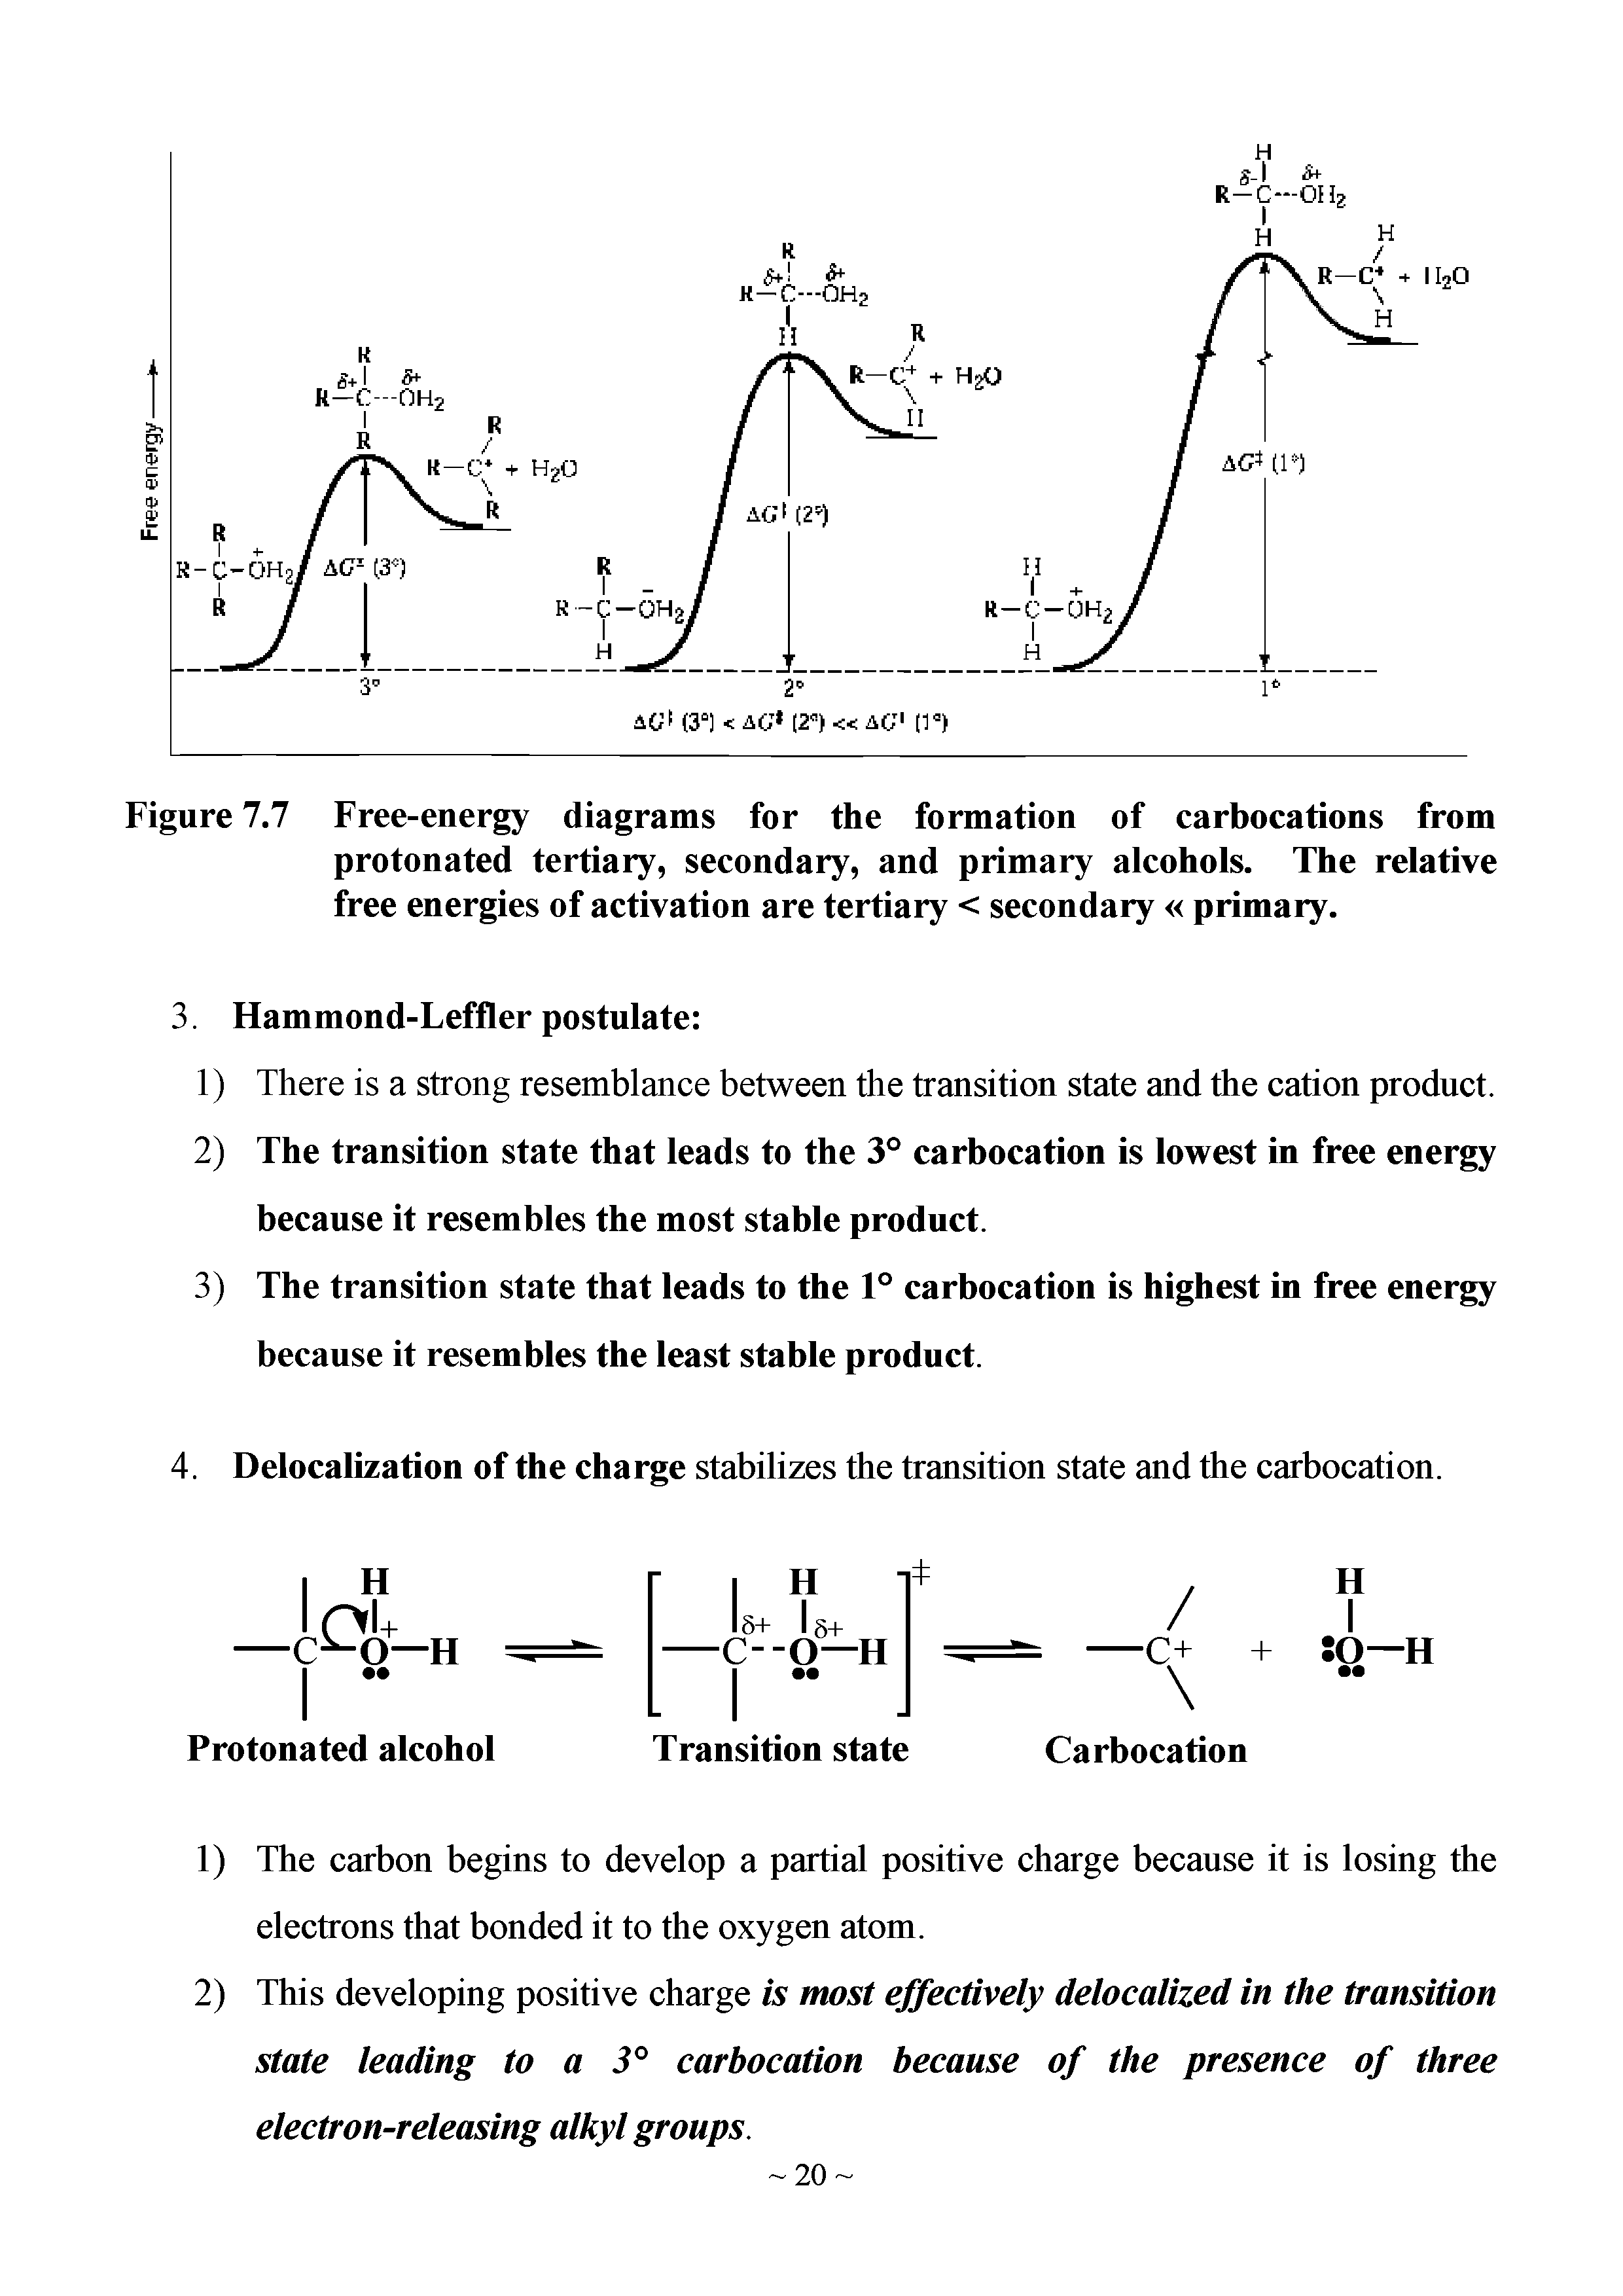 Figure 7.7 Free-energy diagrams for the formation of carbocations from protonated tertiary, secondary, and primary alcohols. The relative free energies of activation are tertiary < secondary primary.